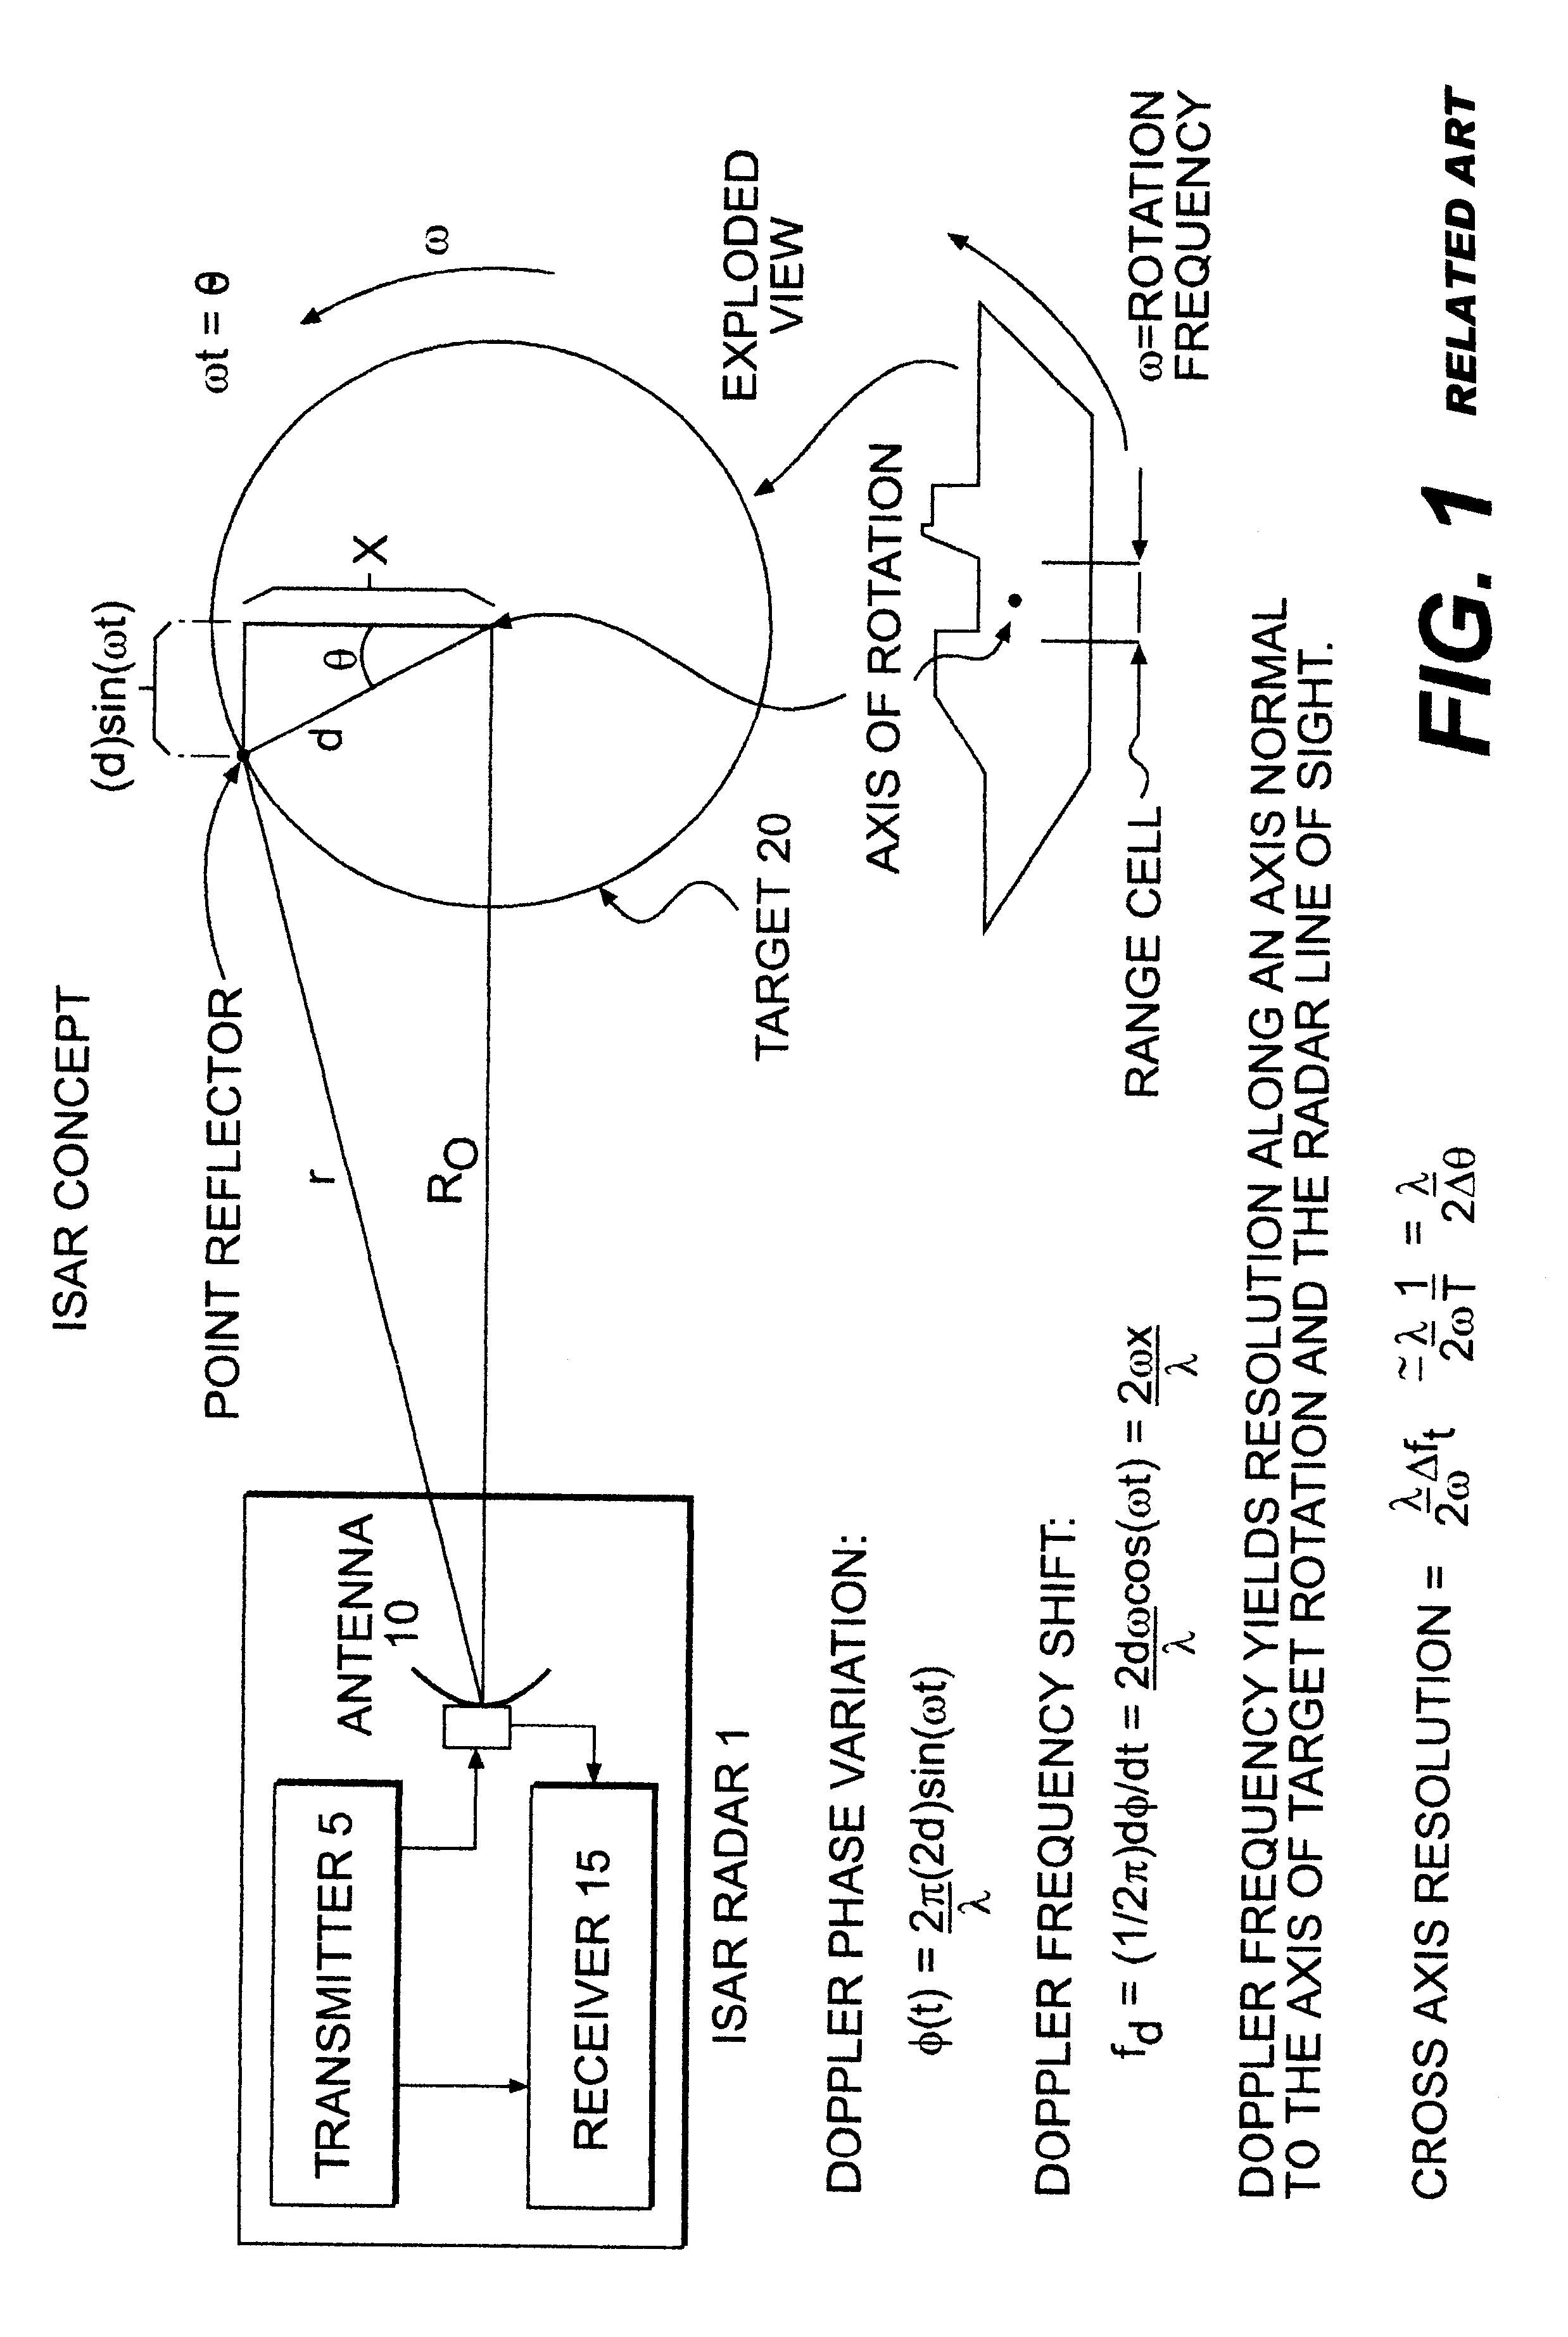 A-scan ISAR classification system and method therefor